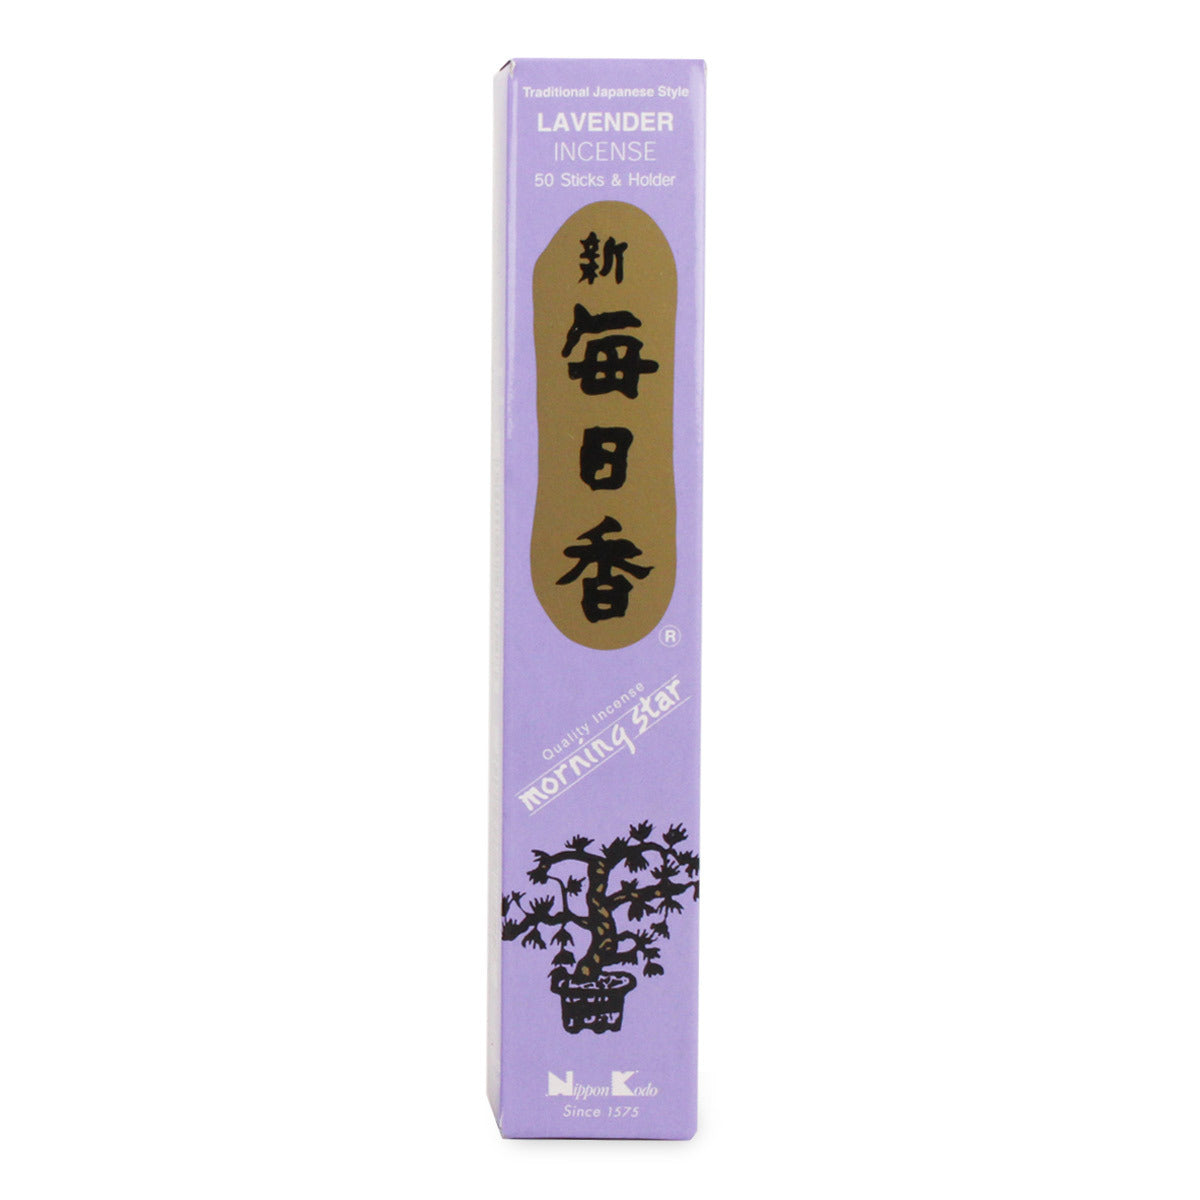 Primary image of Lavender Incense